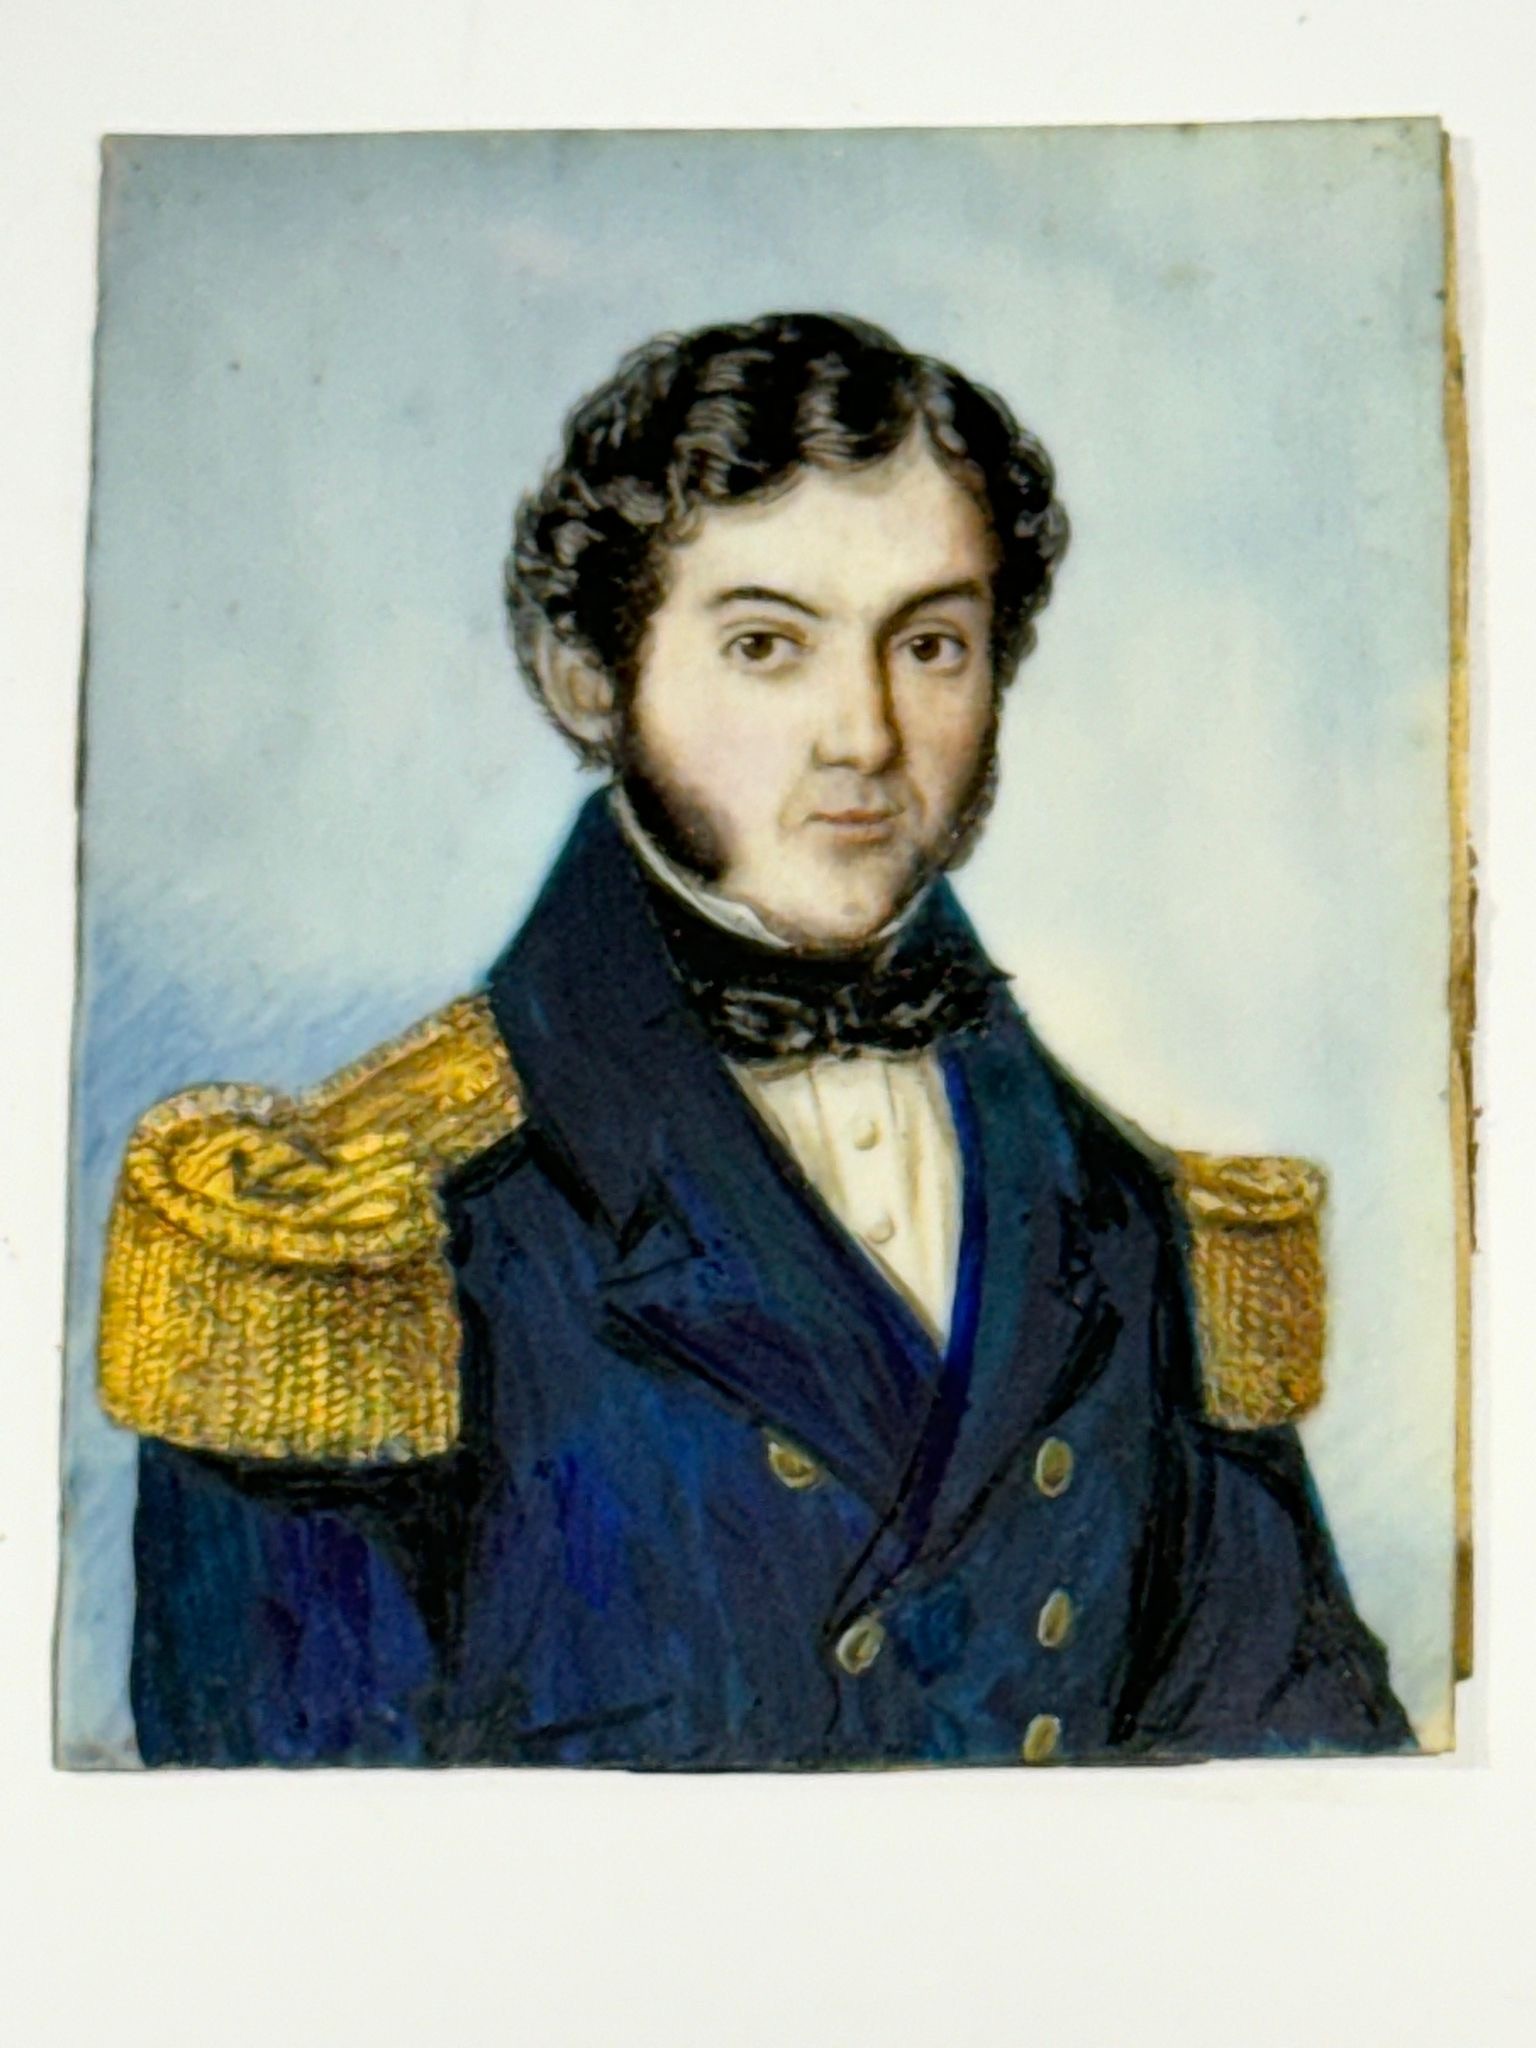 A Mid-19th century rectangular portrait miniature of a Naval Commander, with black curly hair and - Bild 2 aus 2